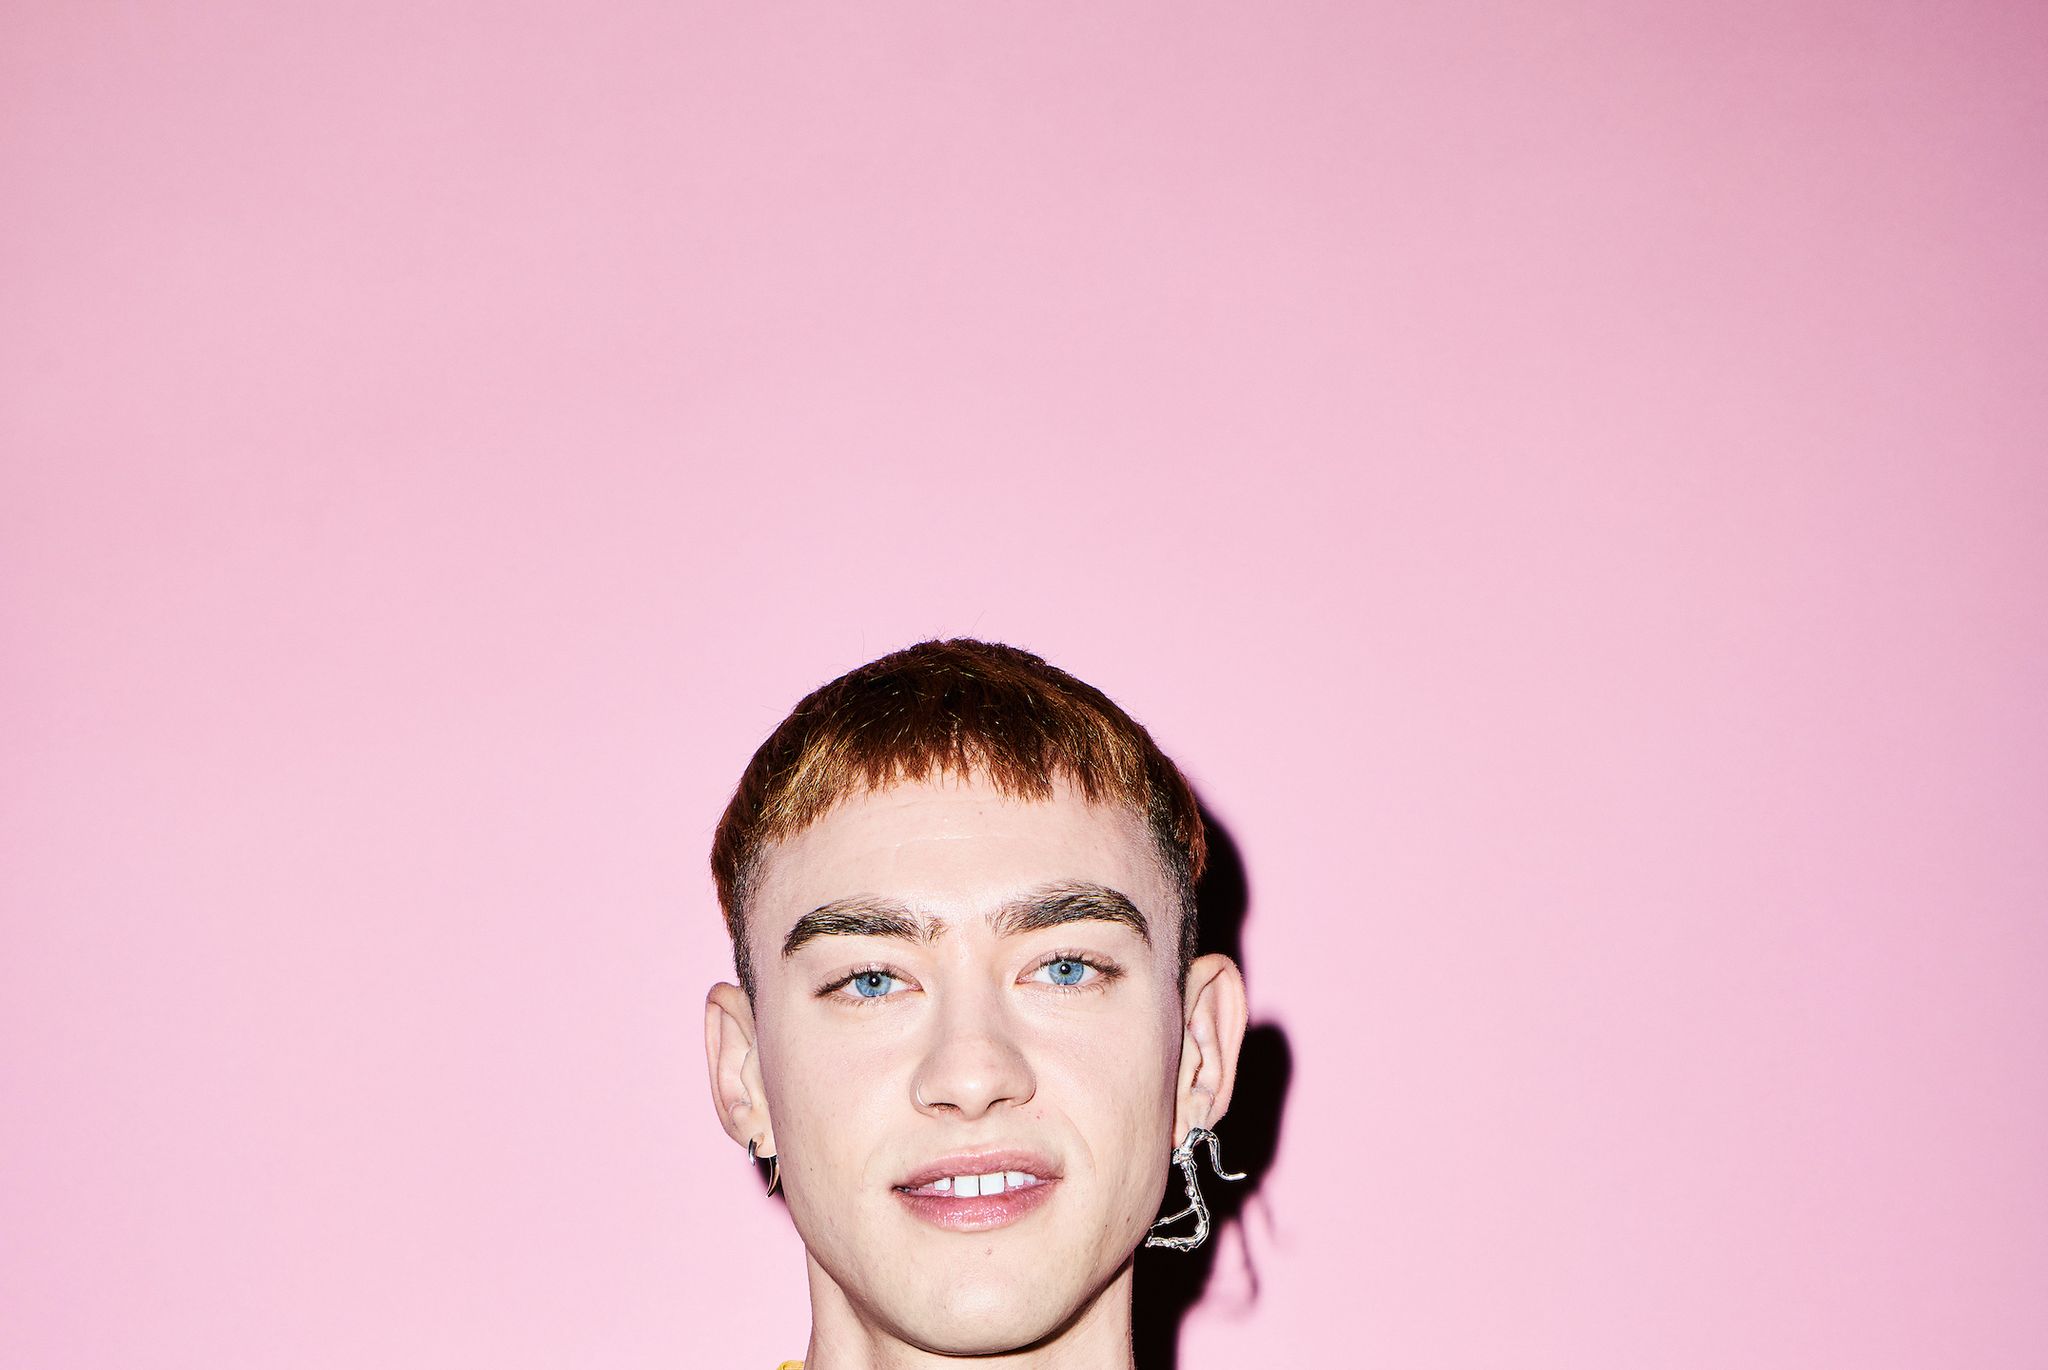 budapest, hungary november 14 olly alexander poses during a portrait session at the mtv emas 2021 at the papp laszlo budapest sports arena on november 14, 2021 in budapest, hungary photo by gareth cattermole mtvgetty images for mtv